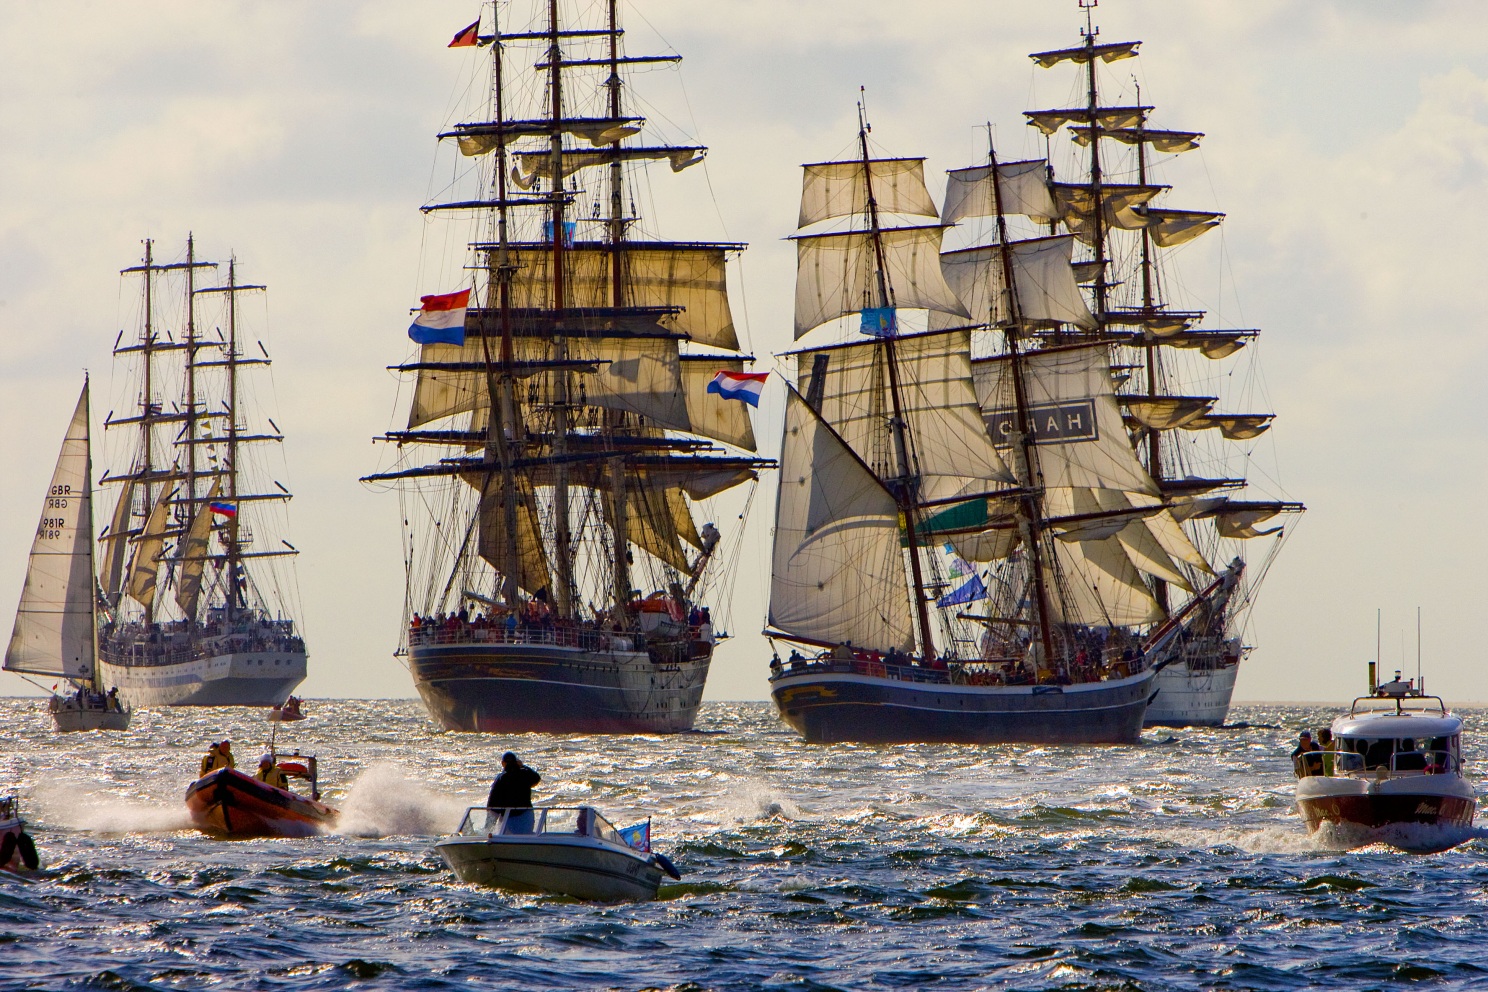 /assets/contentimages/Sail_Amsterdam.jpg